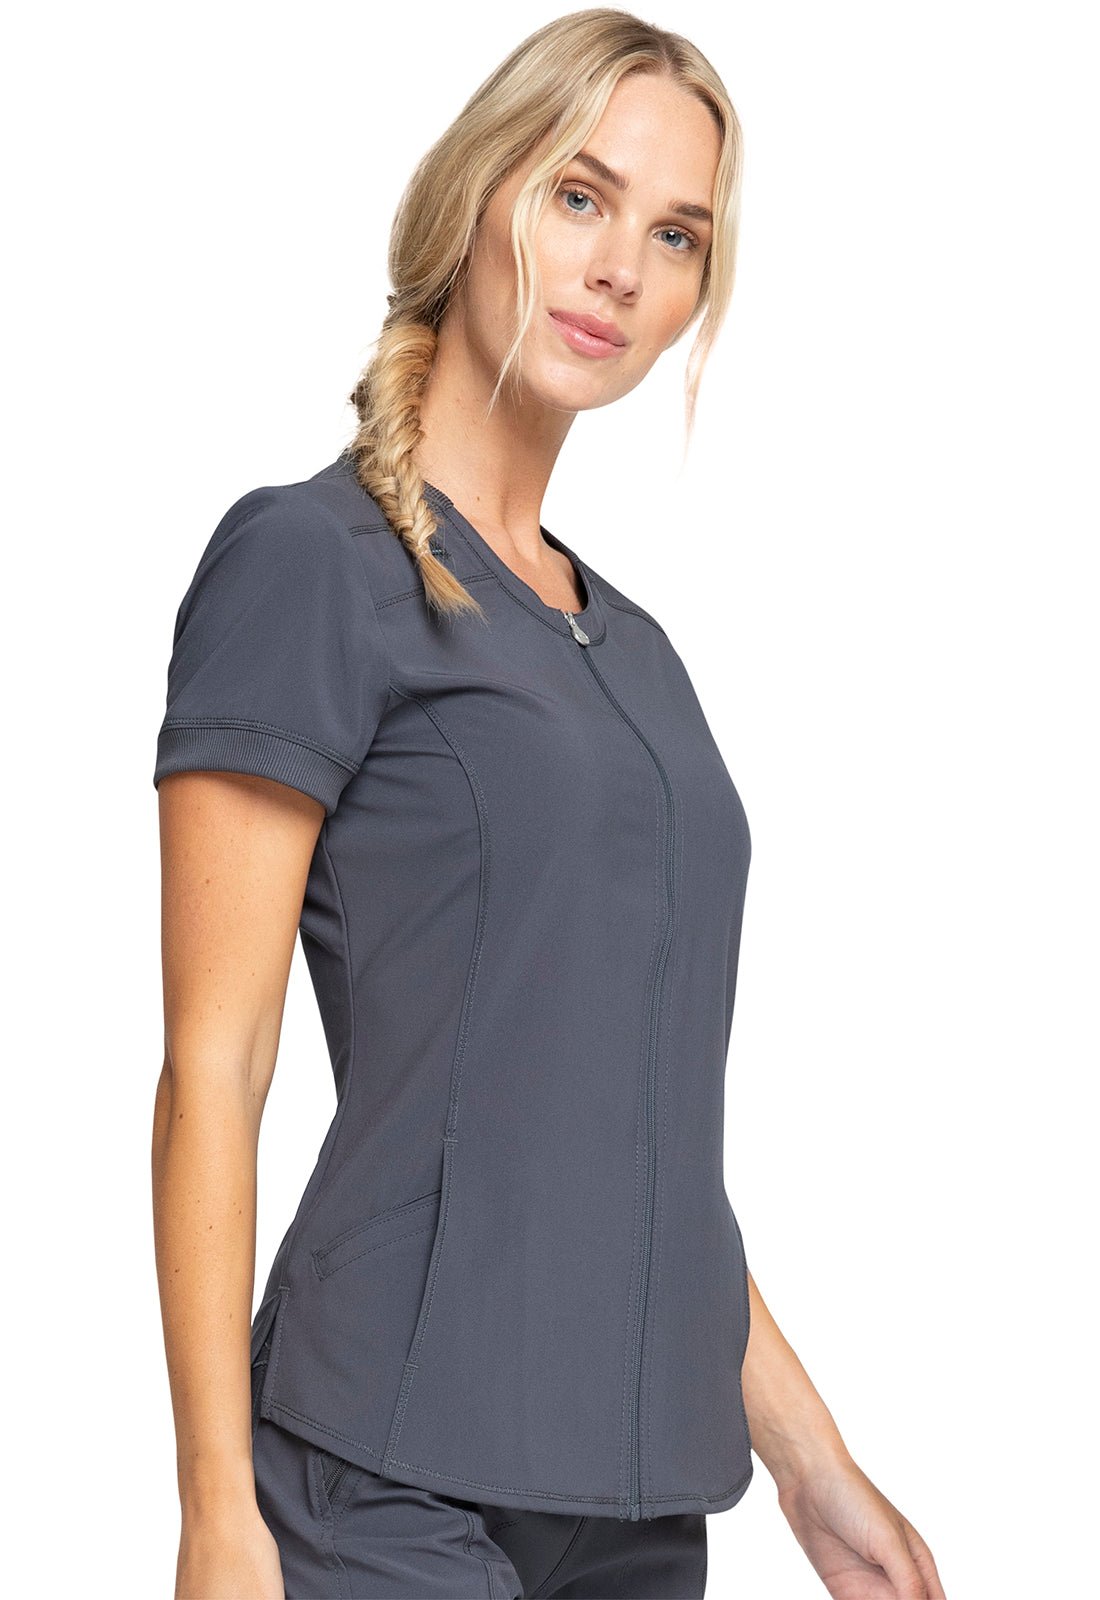 Cherokee Infinity Scrub Zip Front Top CK810A in Black Navy, Pewter, White - Scrubs Select